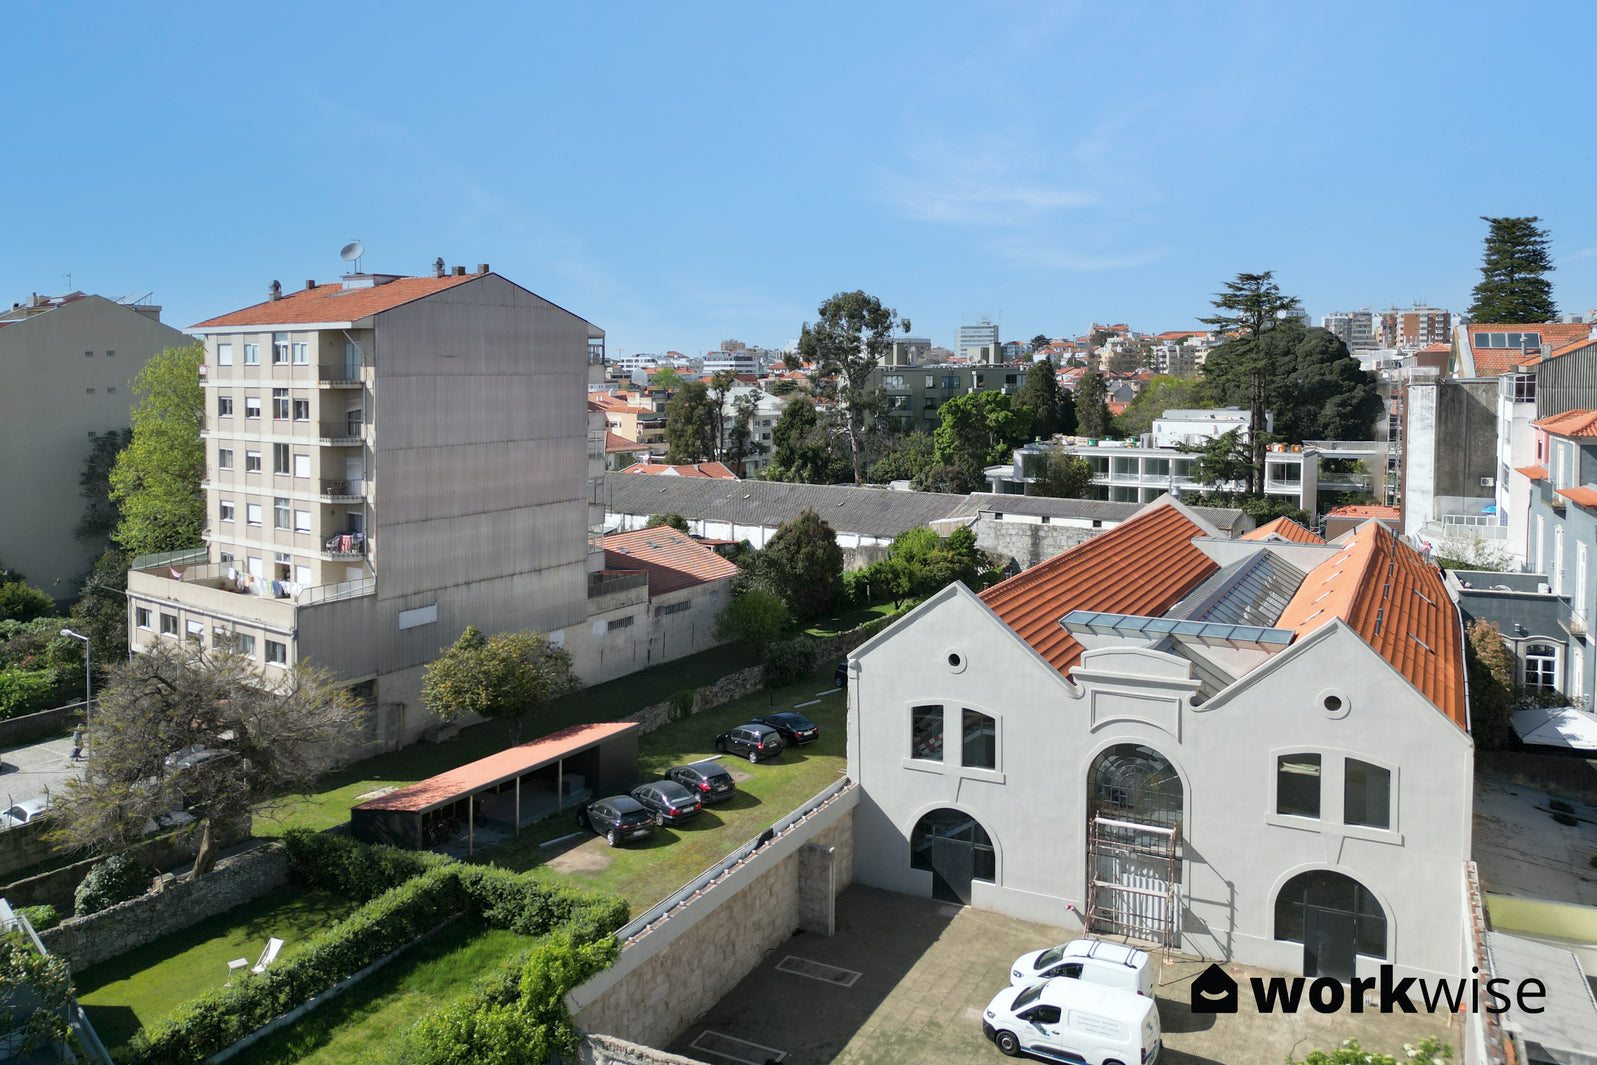 Industrial Plaza - A Premier Coworking Space for Businesses in Porto